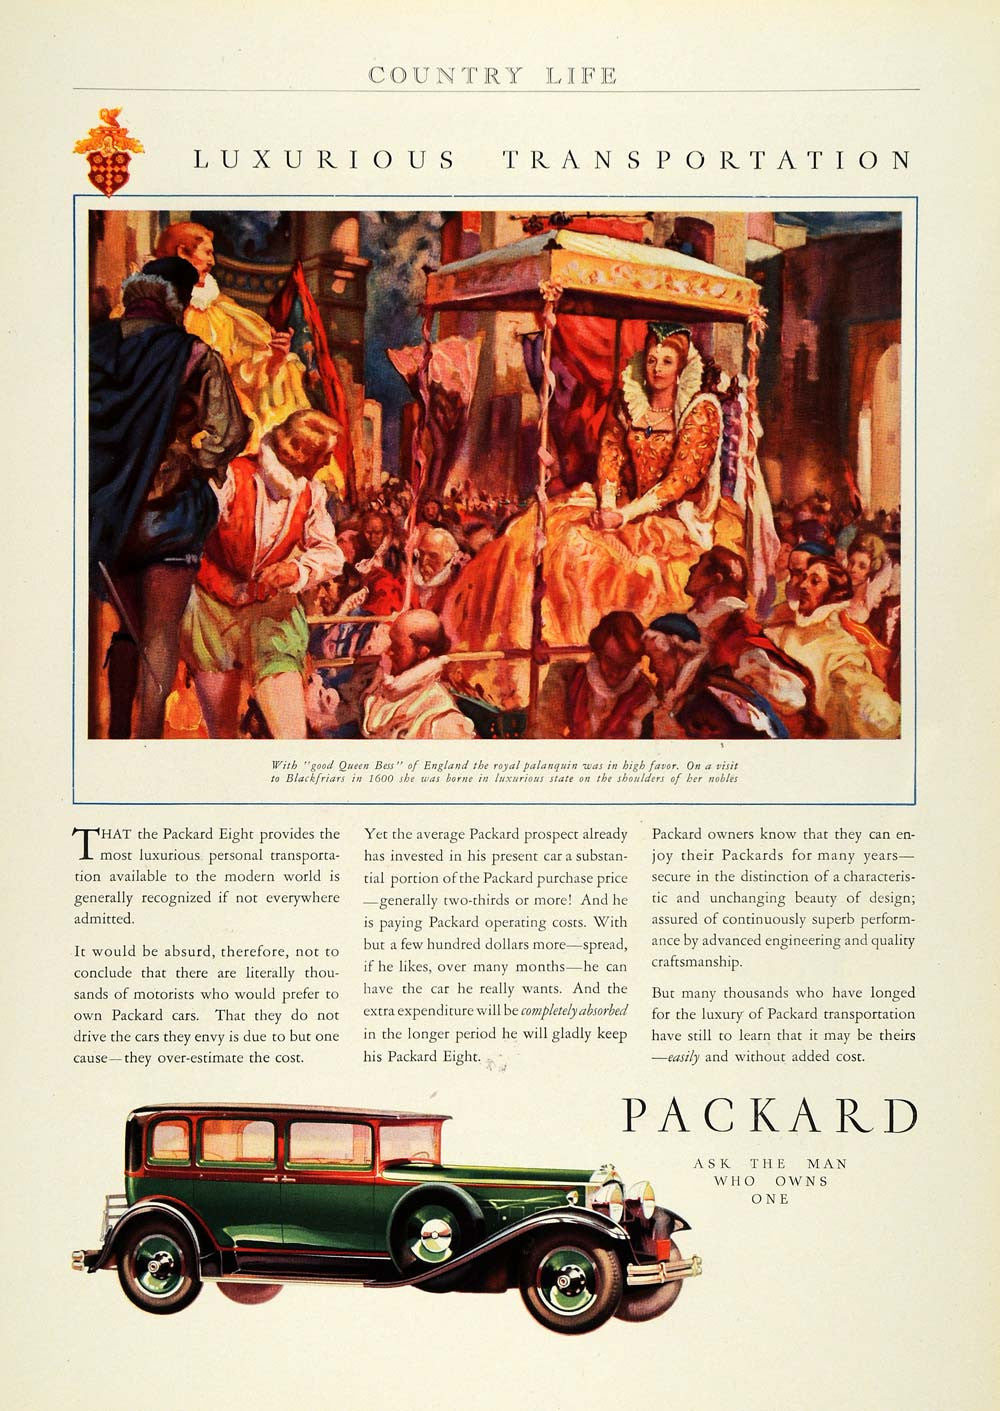 1930 Ad Antique Packard Eight Car England Queen Elizabeth I Royalty Litter COL2 - Period Paper
